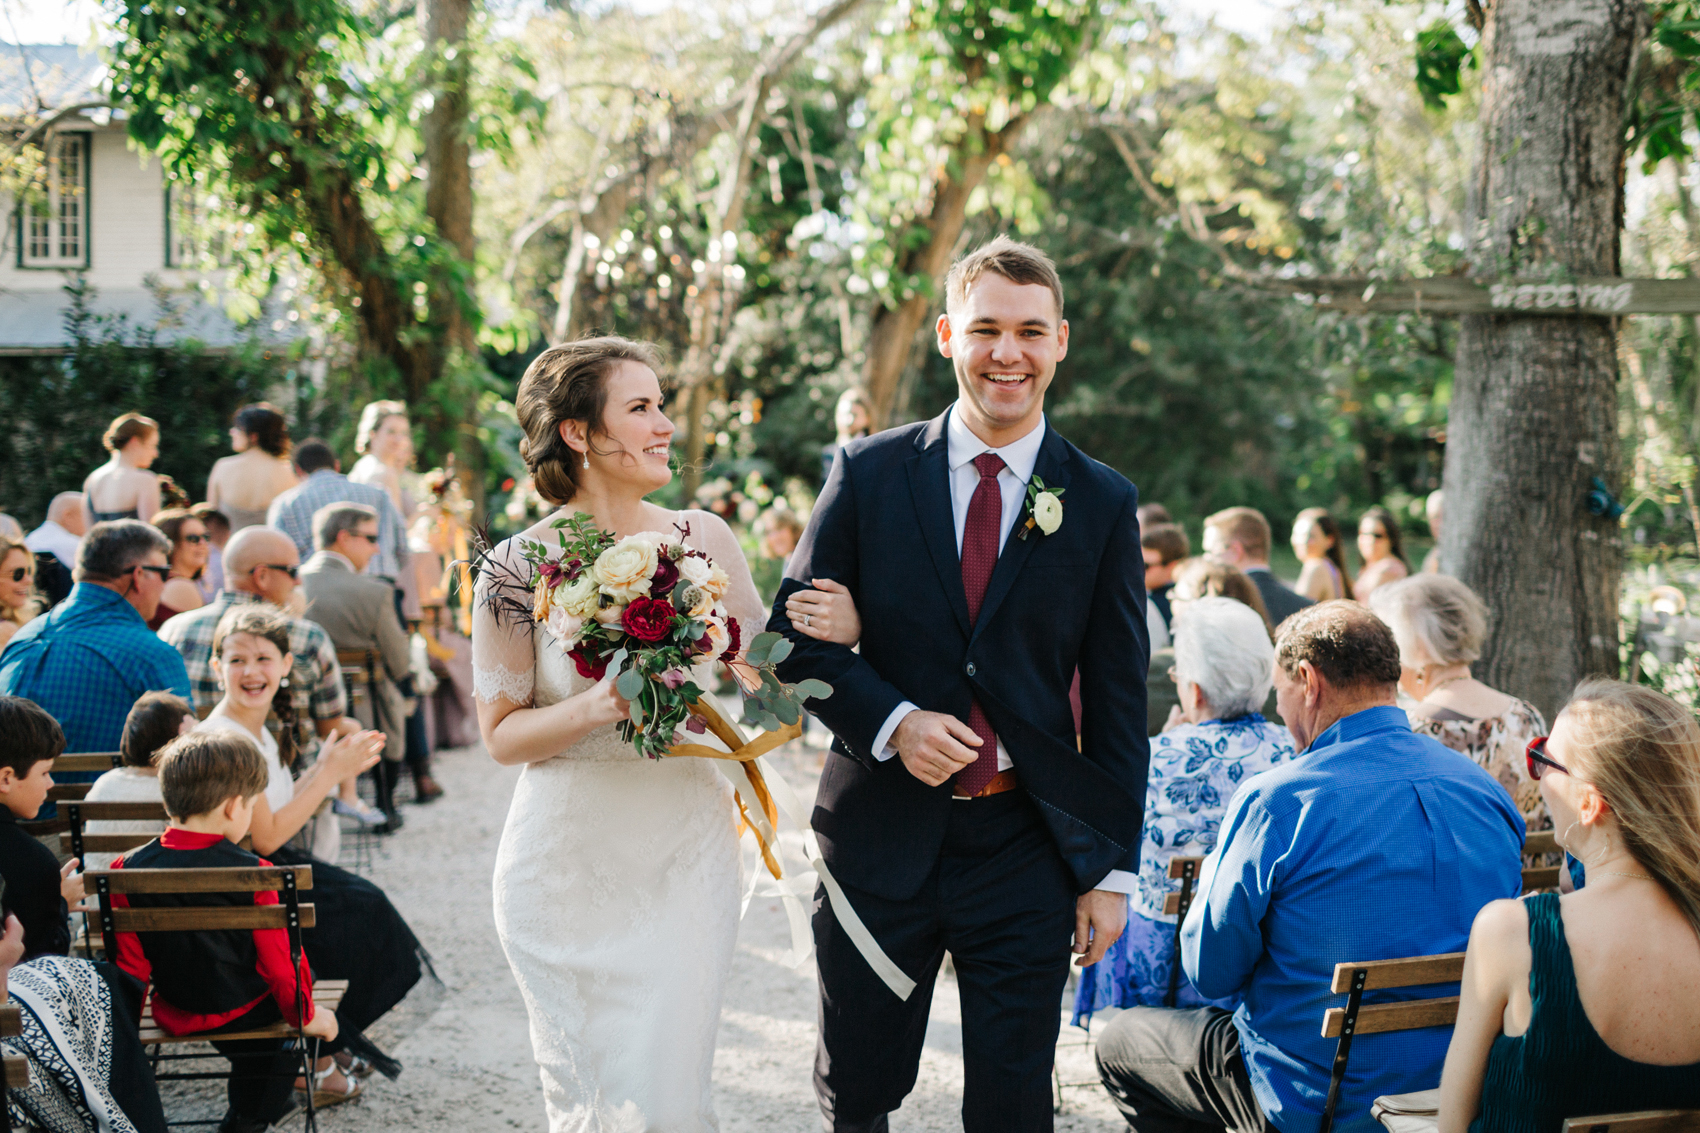 bride and groom laughing and smiling as they walk down the aisle after exchanging vows at their Orlando garden wedding outdoor ceremony